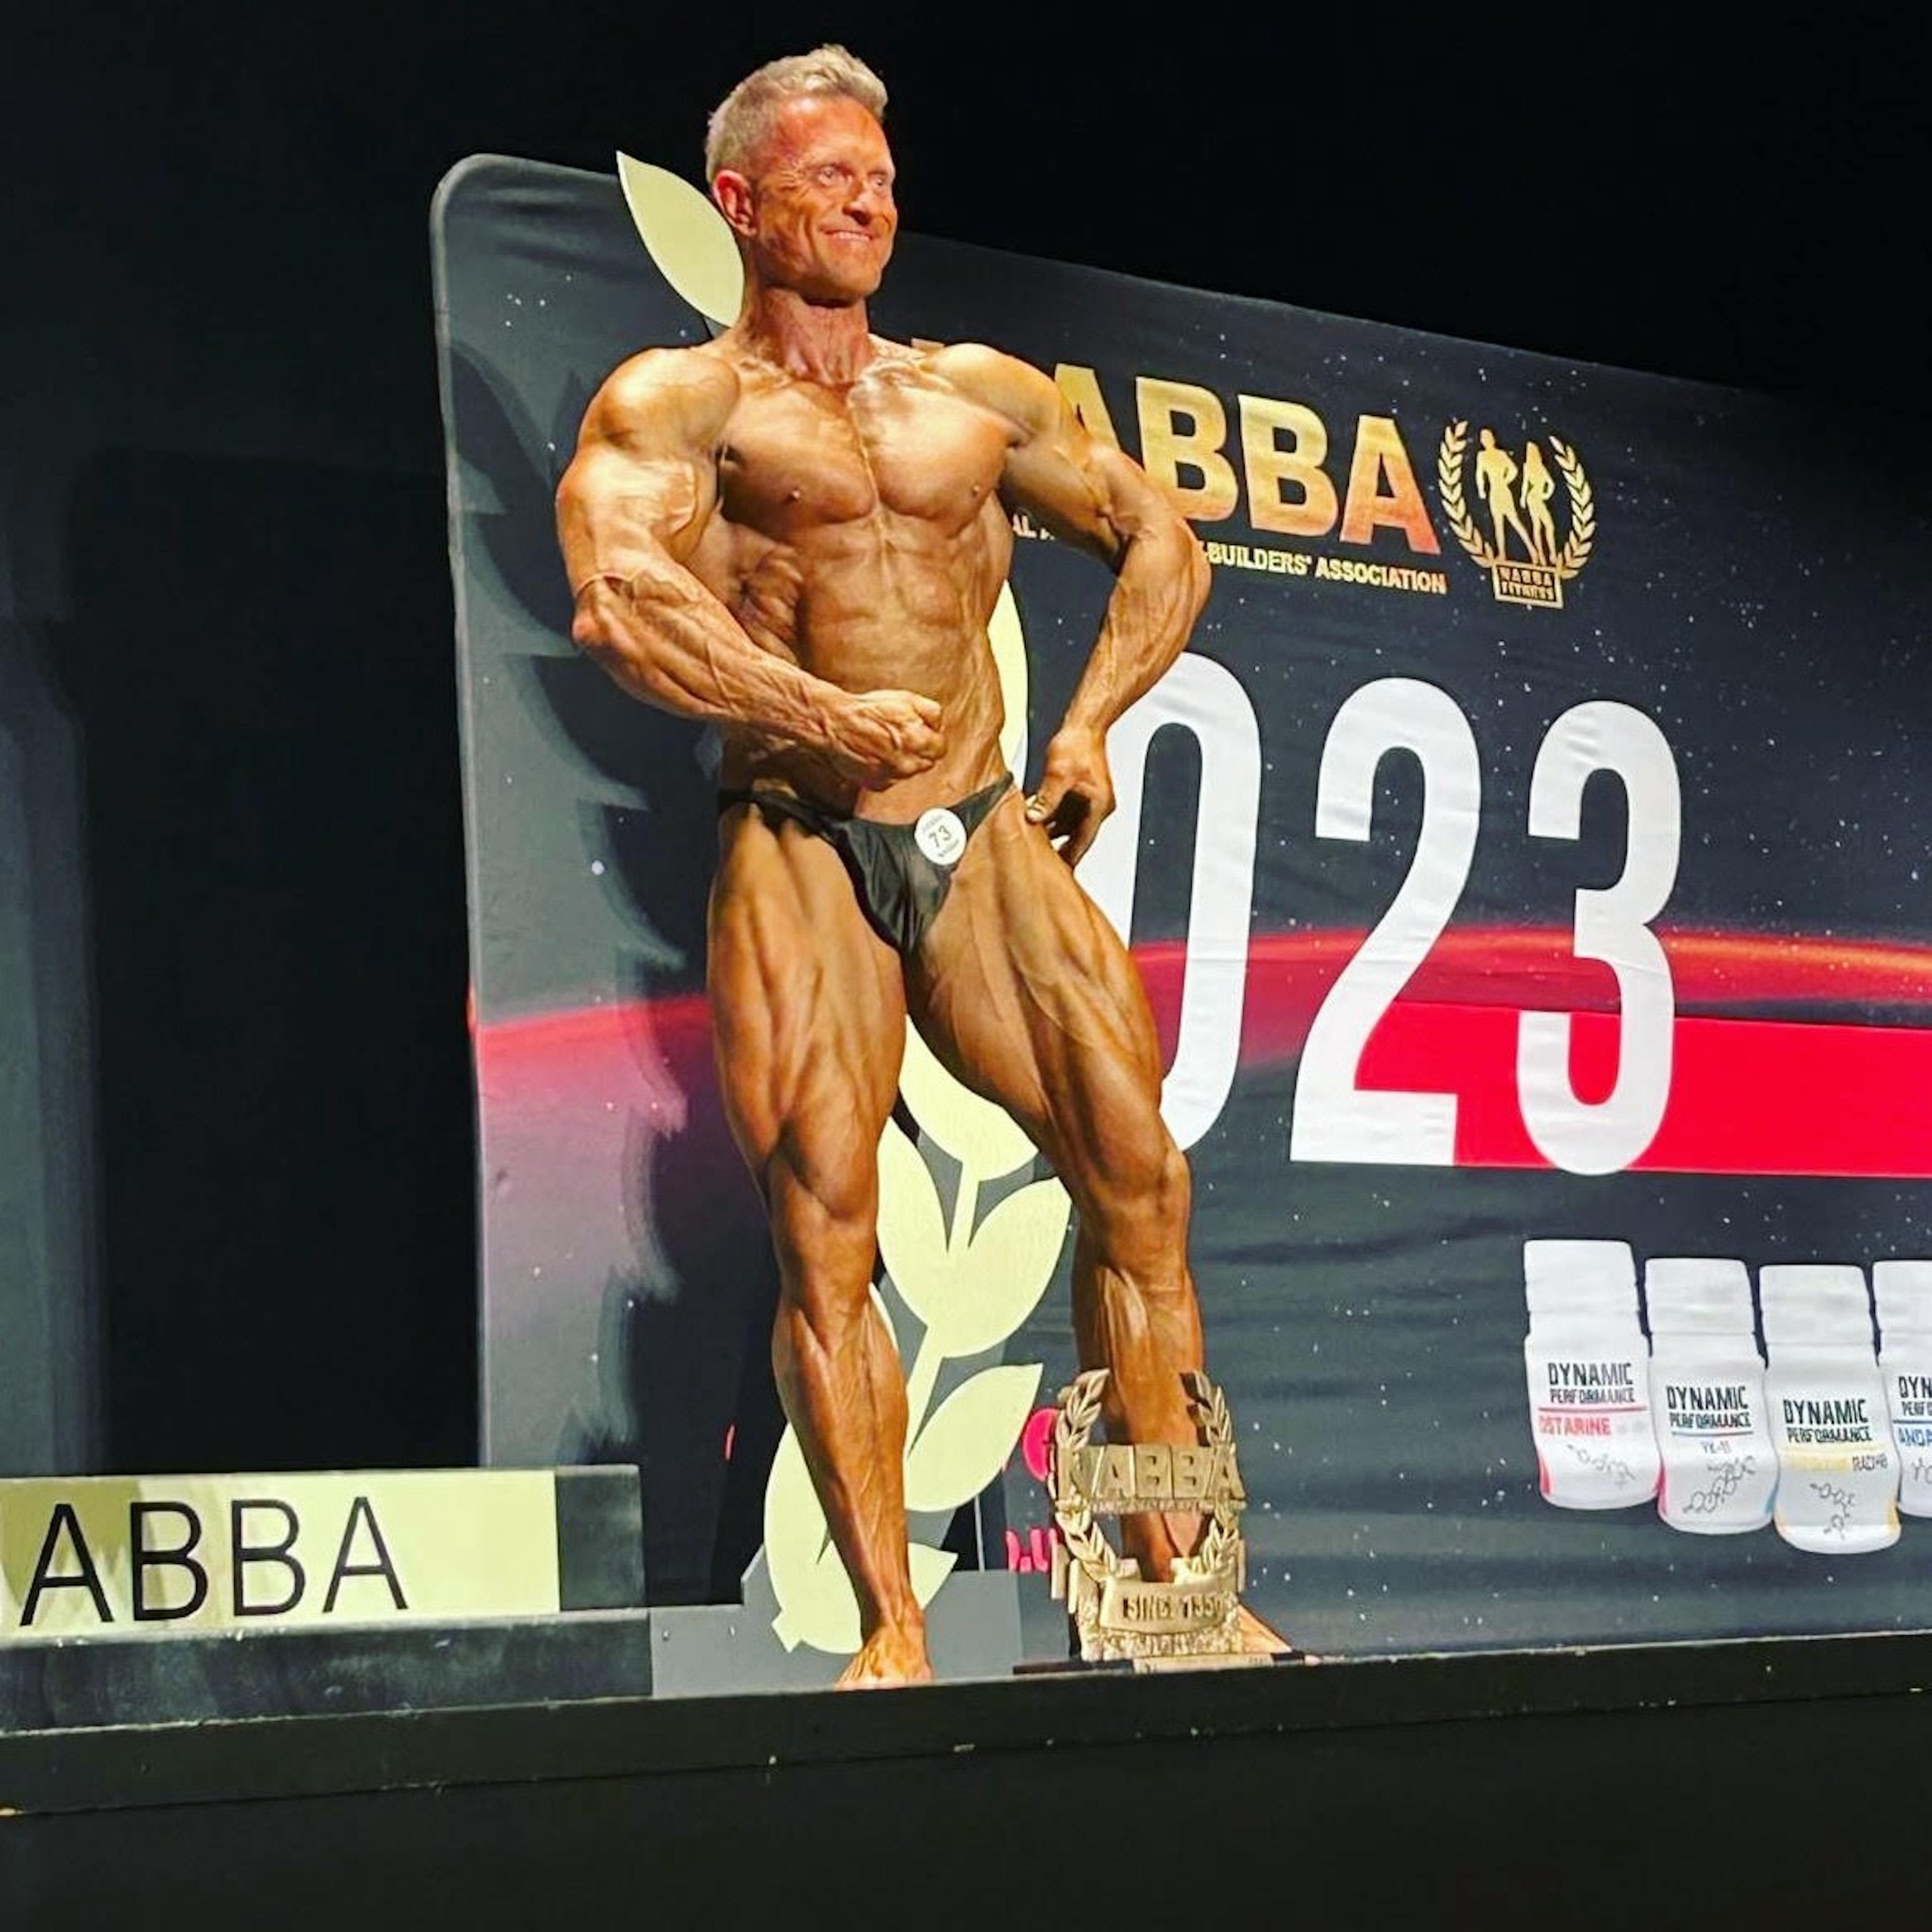 Bodybuilder Mark Taylor, 52, credits winning the Mr Universe Masters Over 45 title to a high-carbohydrate diet. Photo: Mark Taylor